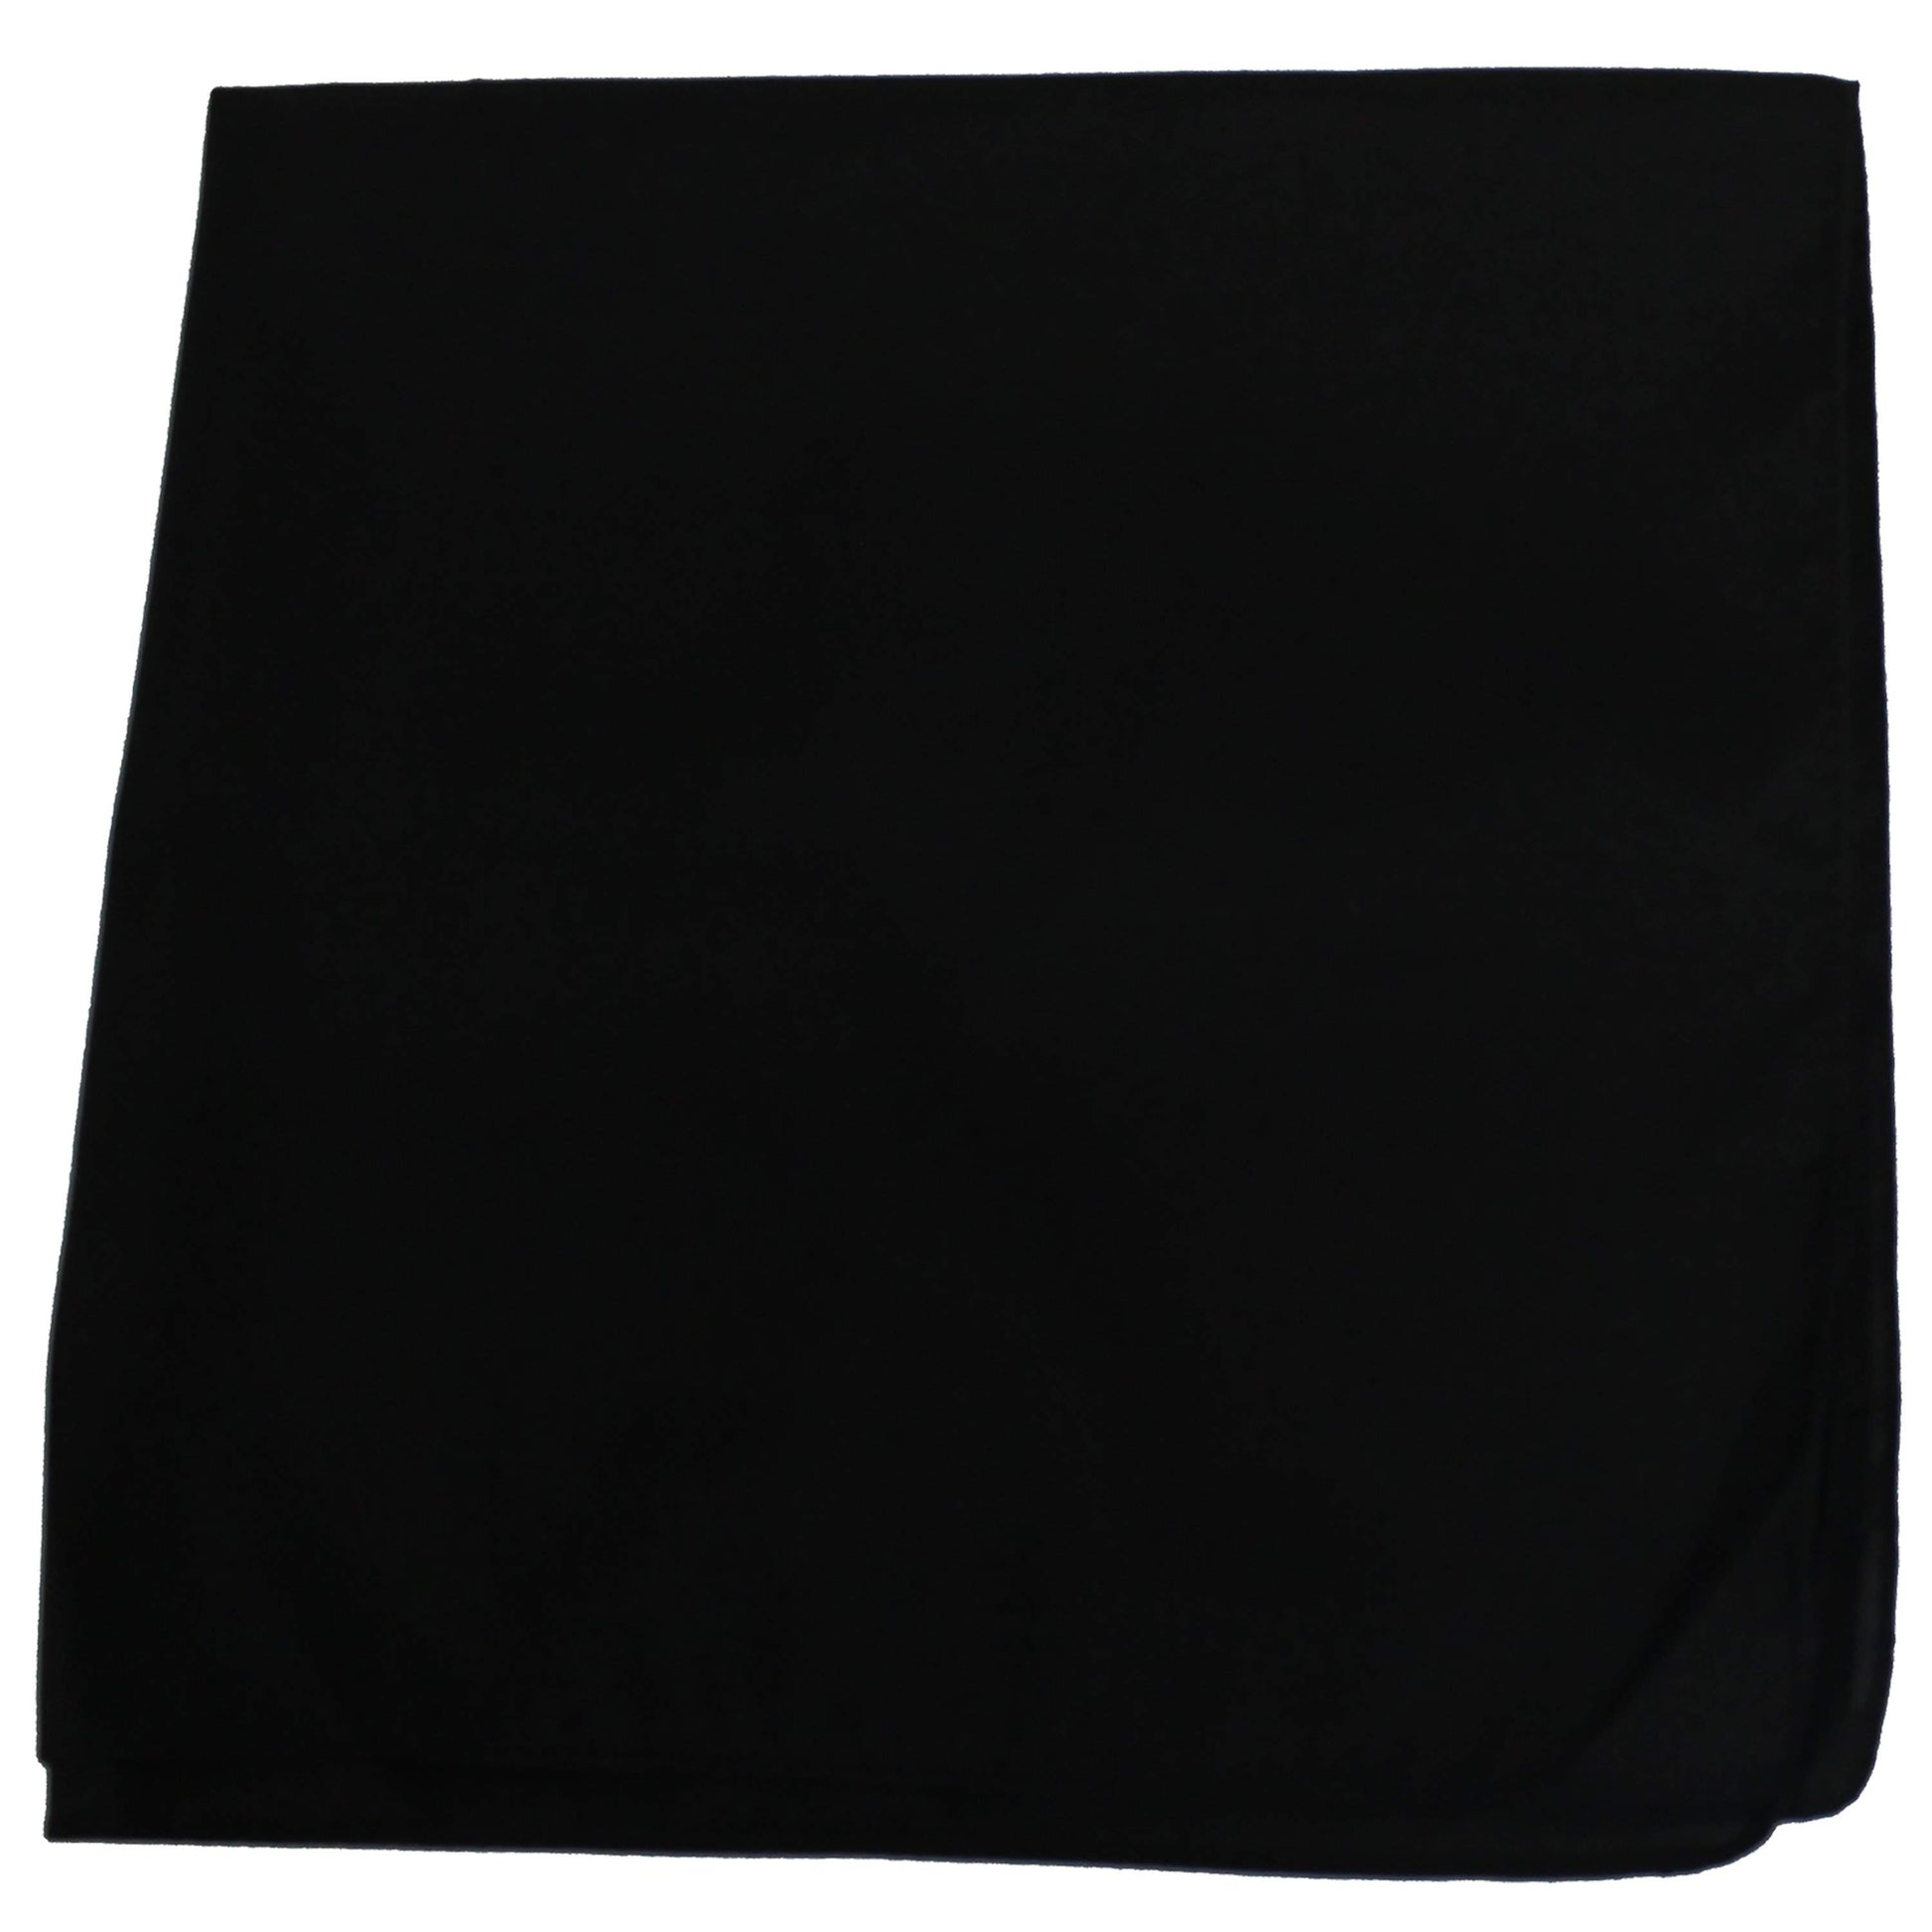 36 Pack Uni Style Apparel Solid 100% Cotton 22 x 22 Inch Bandanas